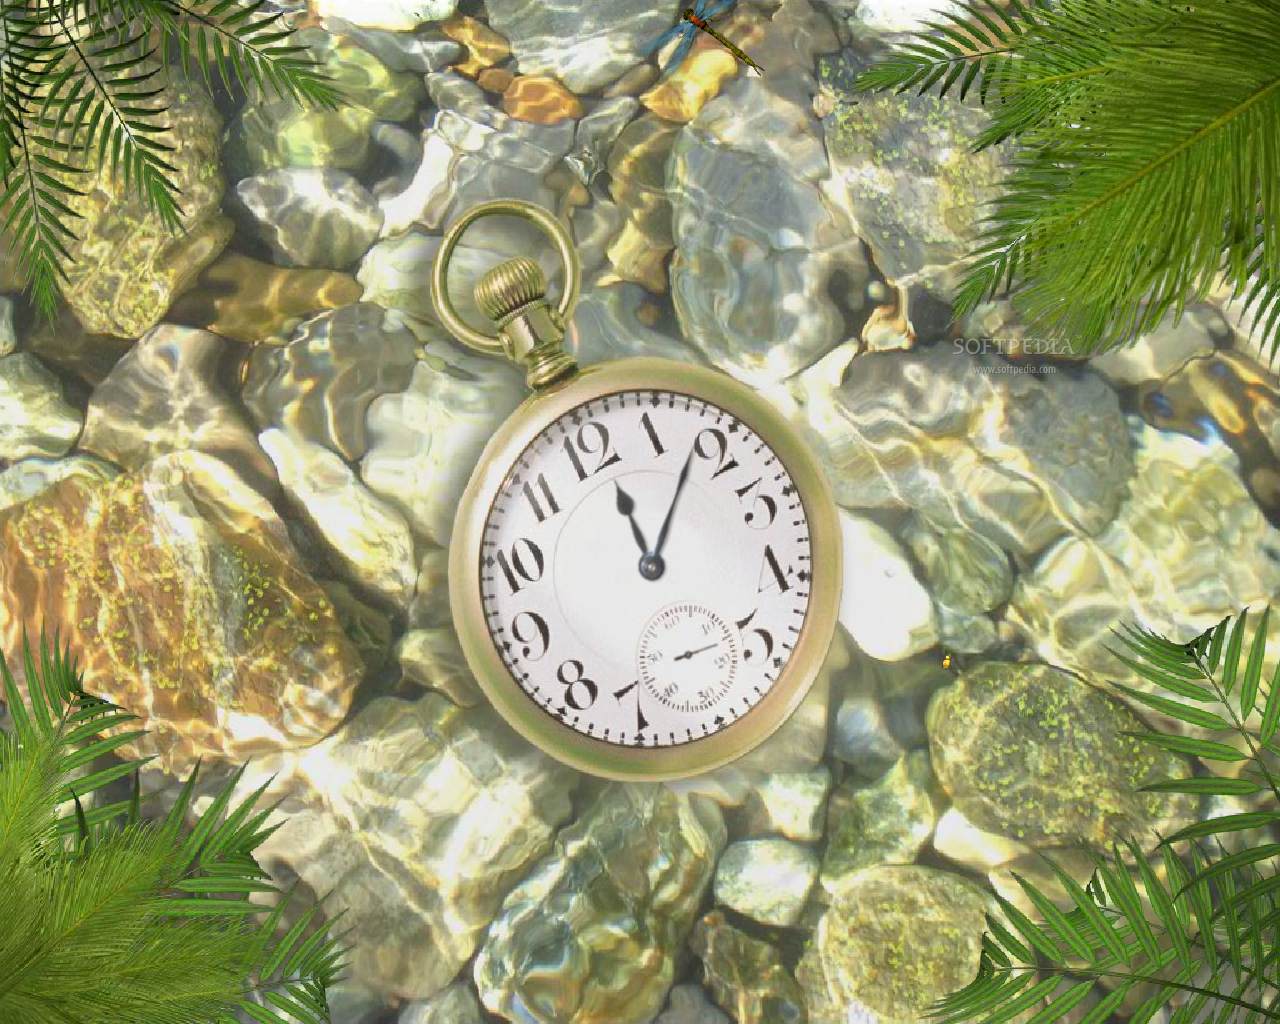 Underwater Clock Animated Screensaver This Is The Image That Will